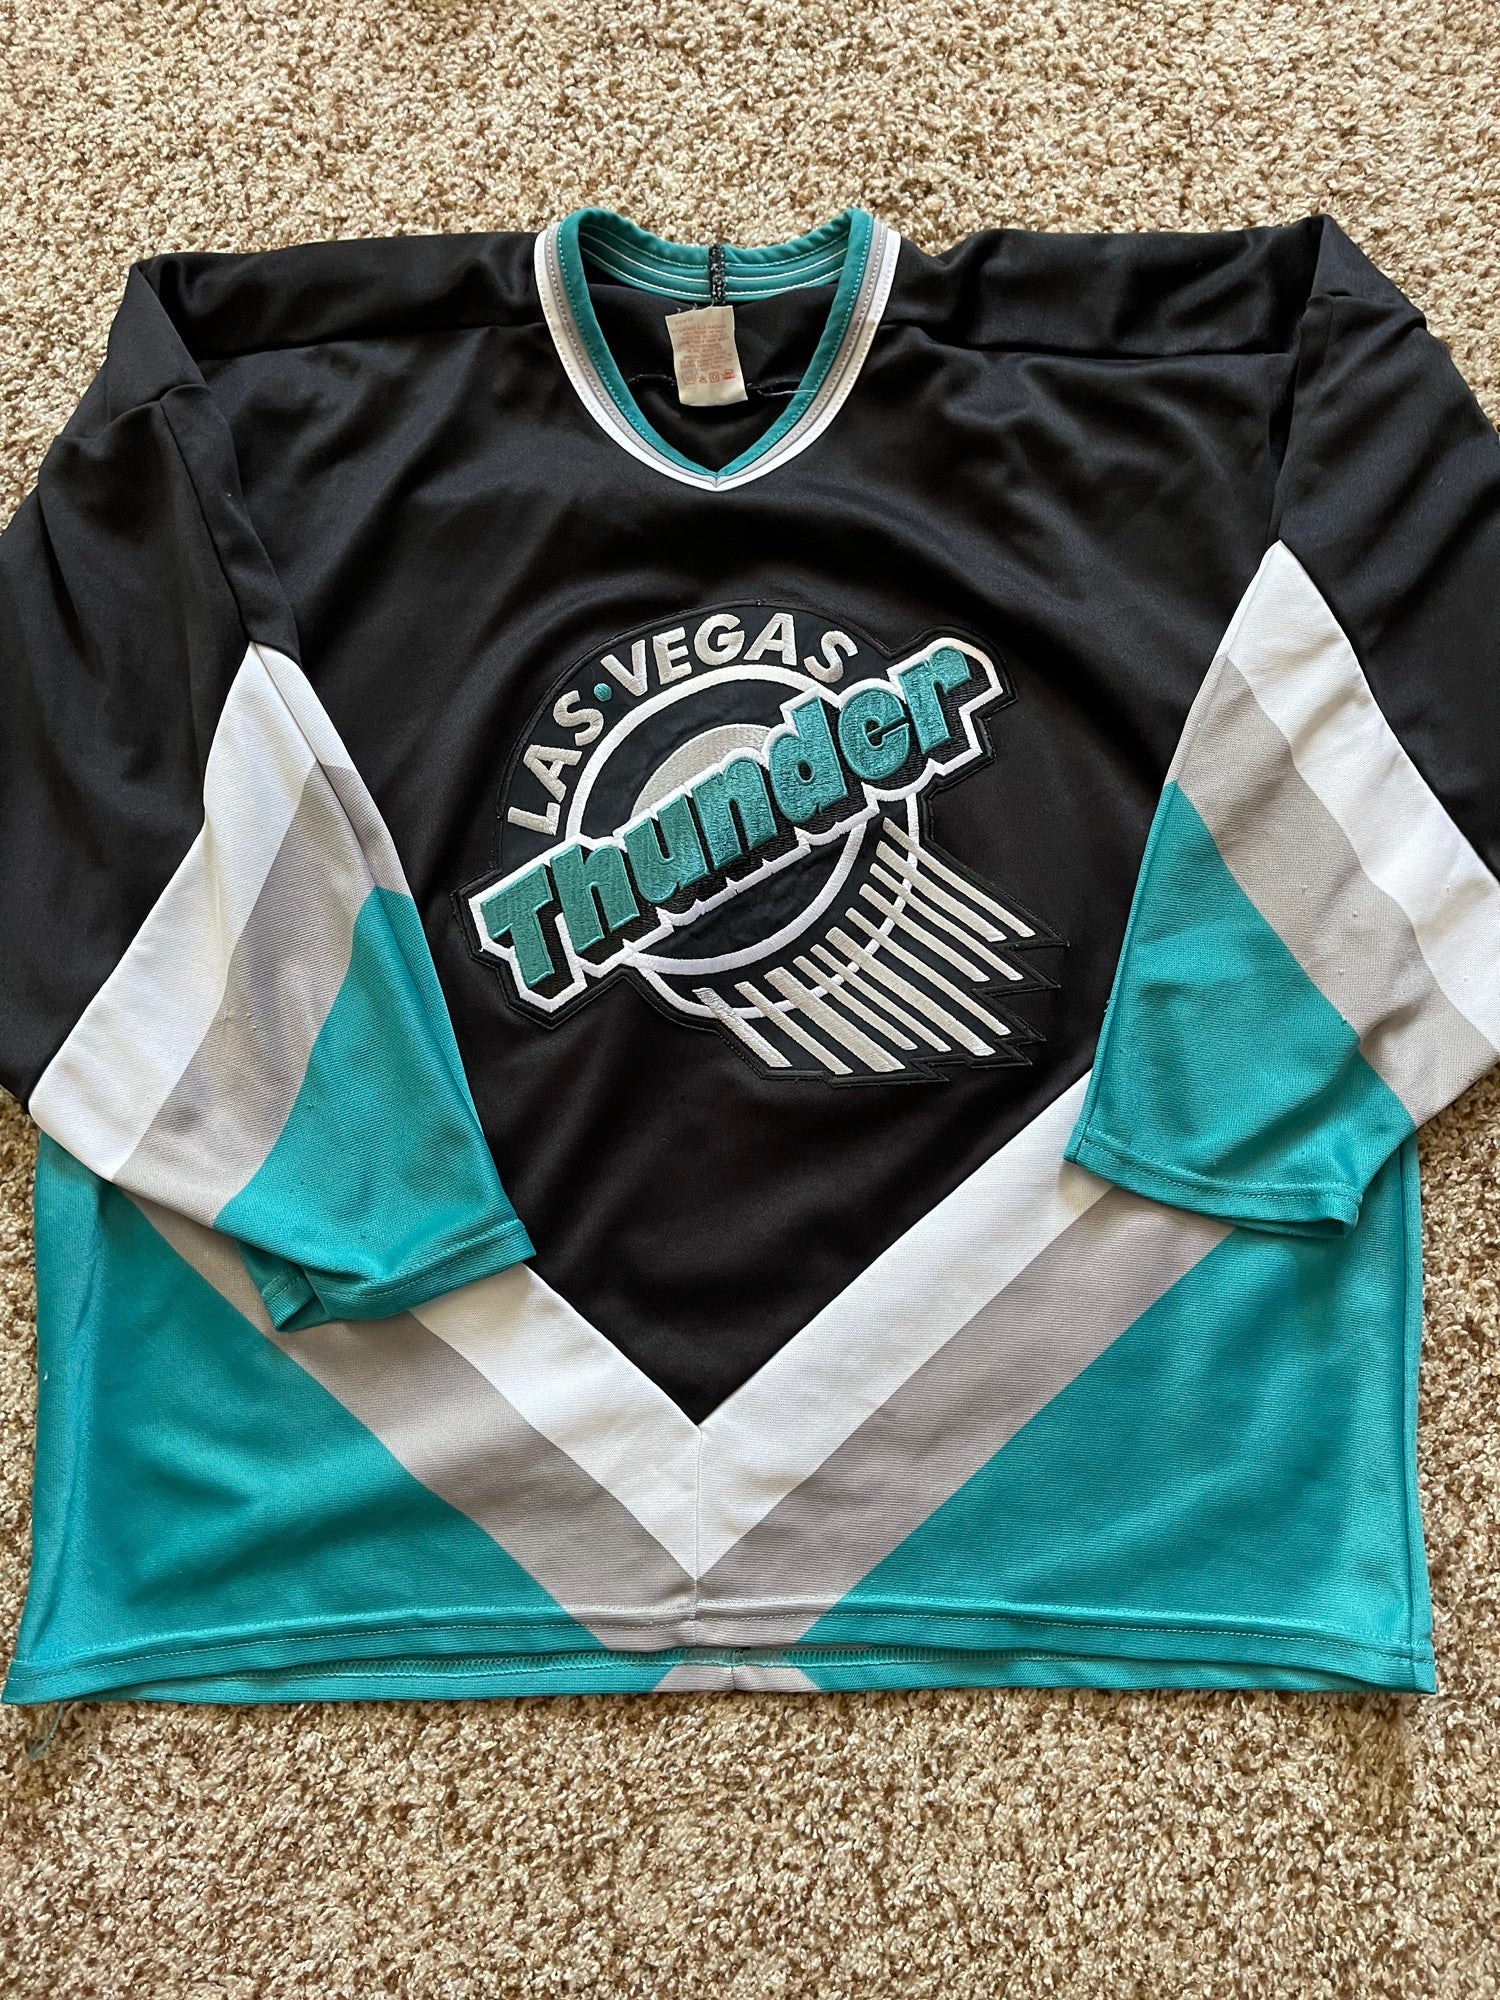 Las Vegas Thunder Hockey Active T-Shirt for Sale by